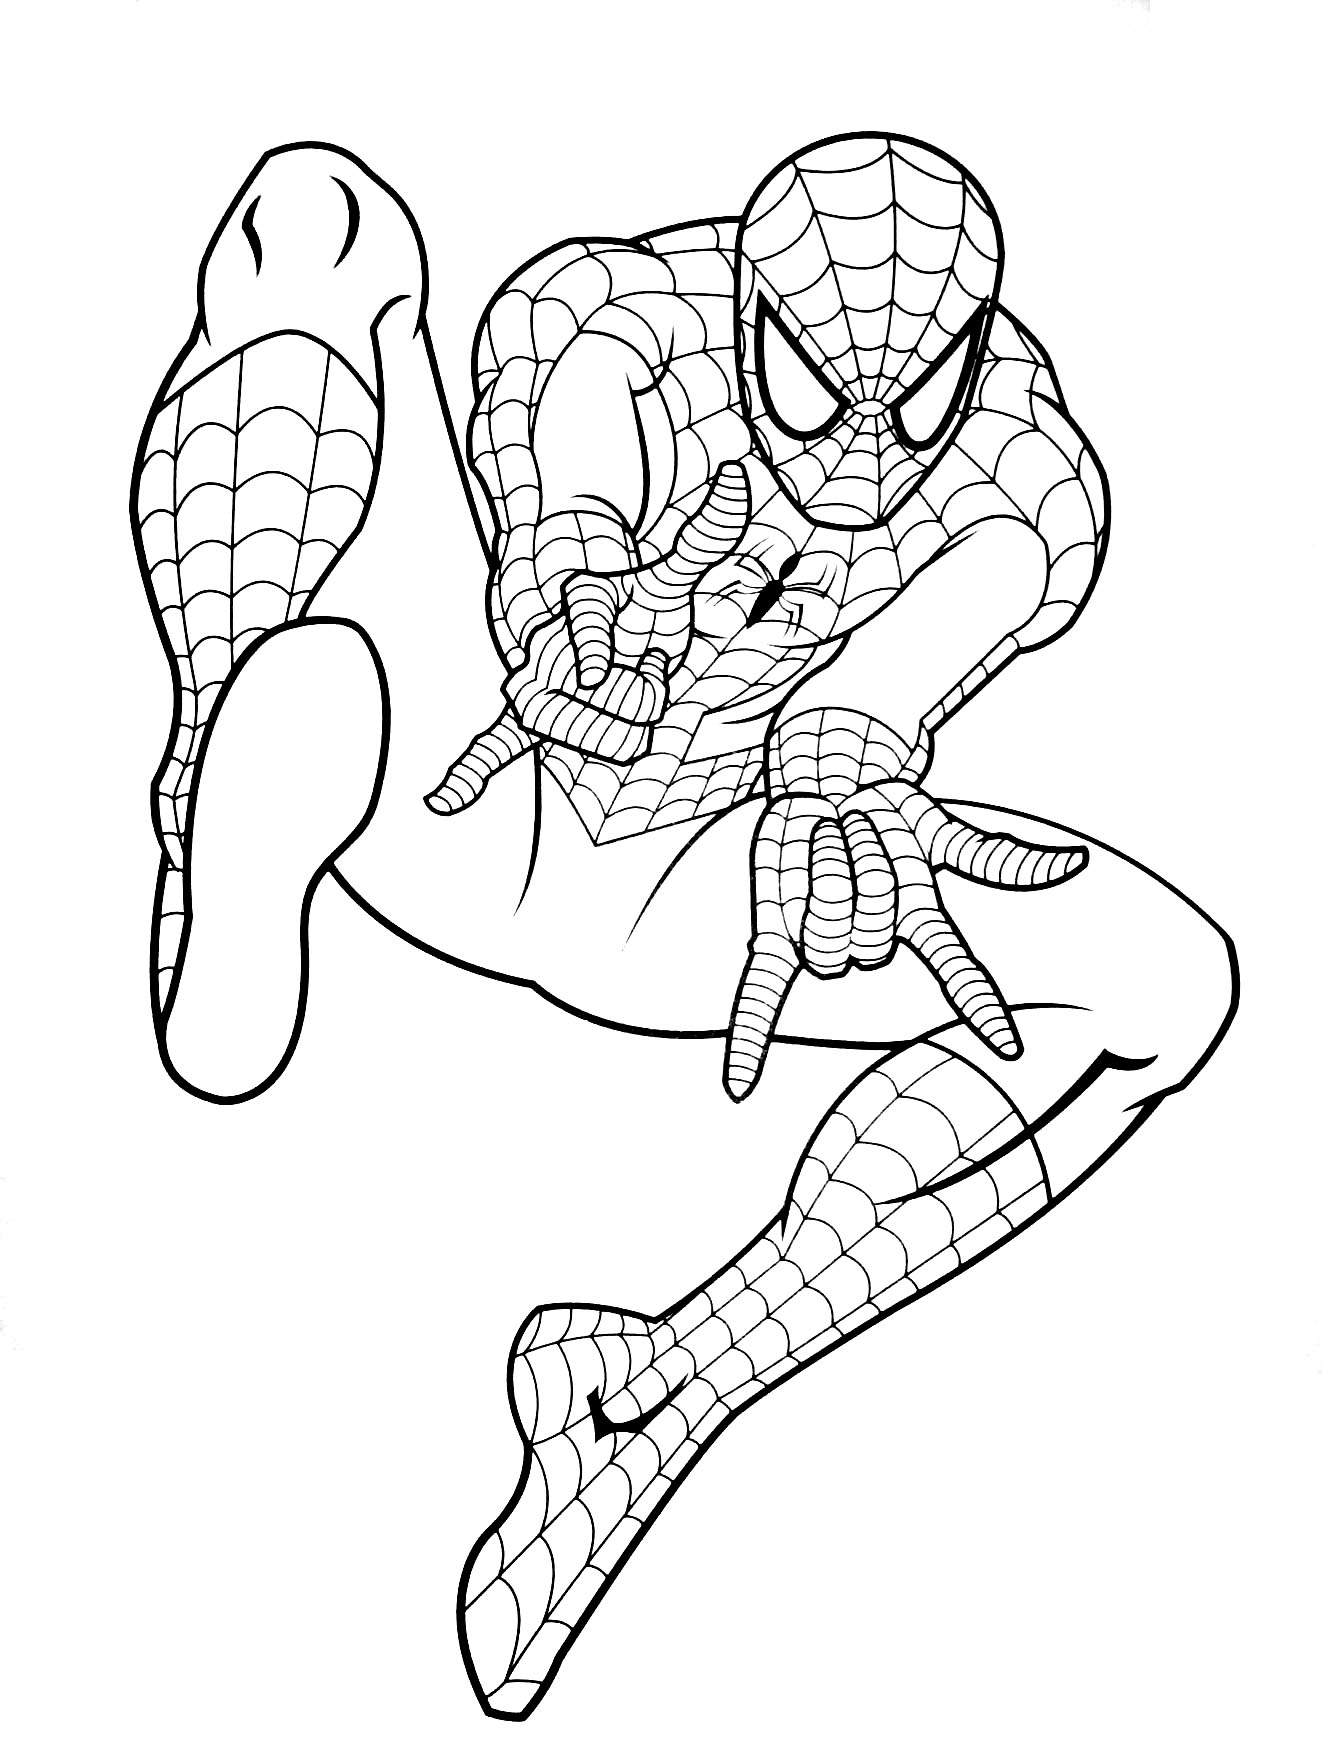 Coloring pages free printable coloring for kids spiderman